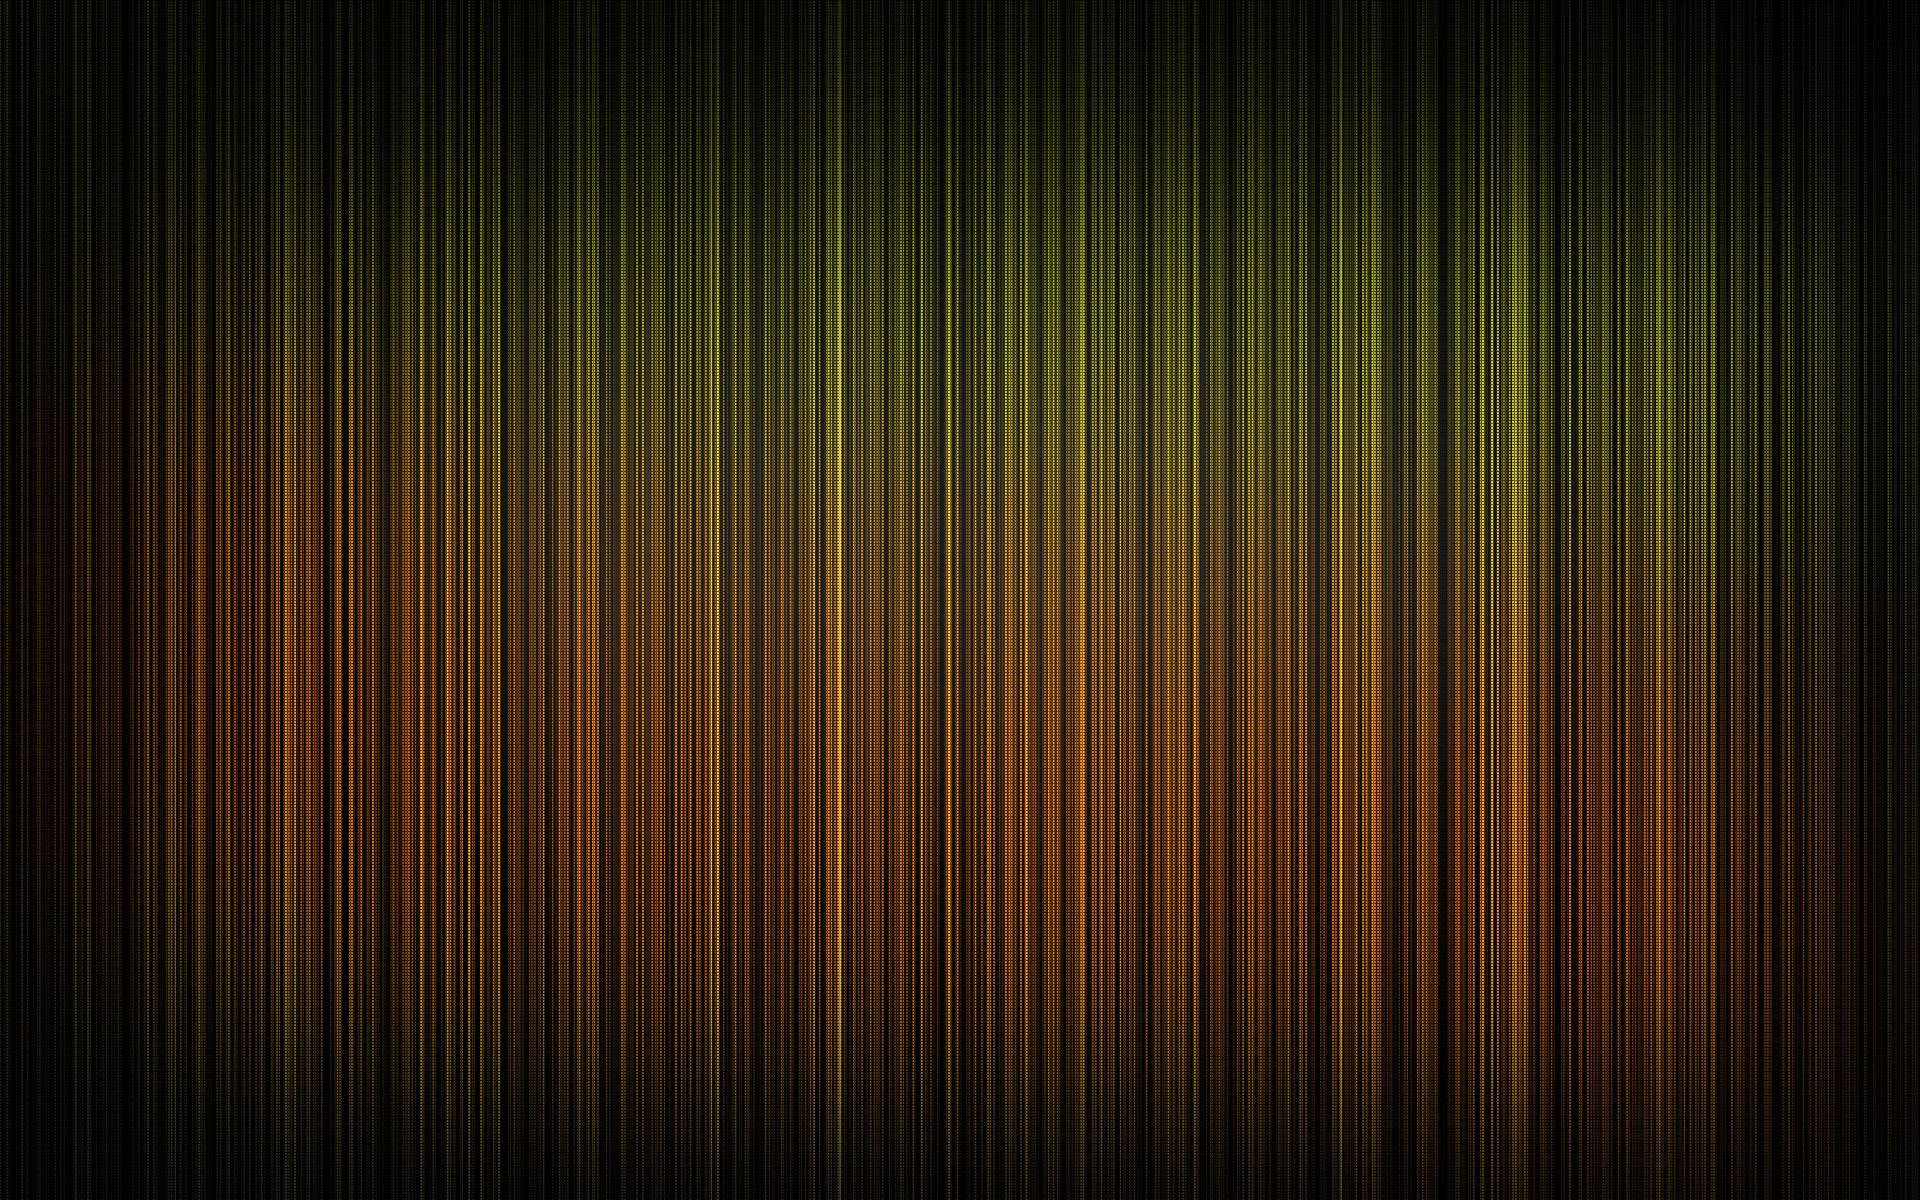 Brown And Green Vertical Lines Wallpaper